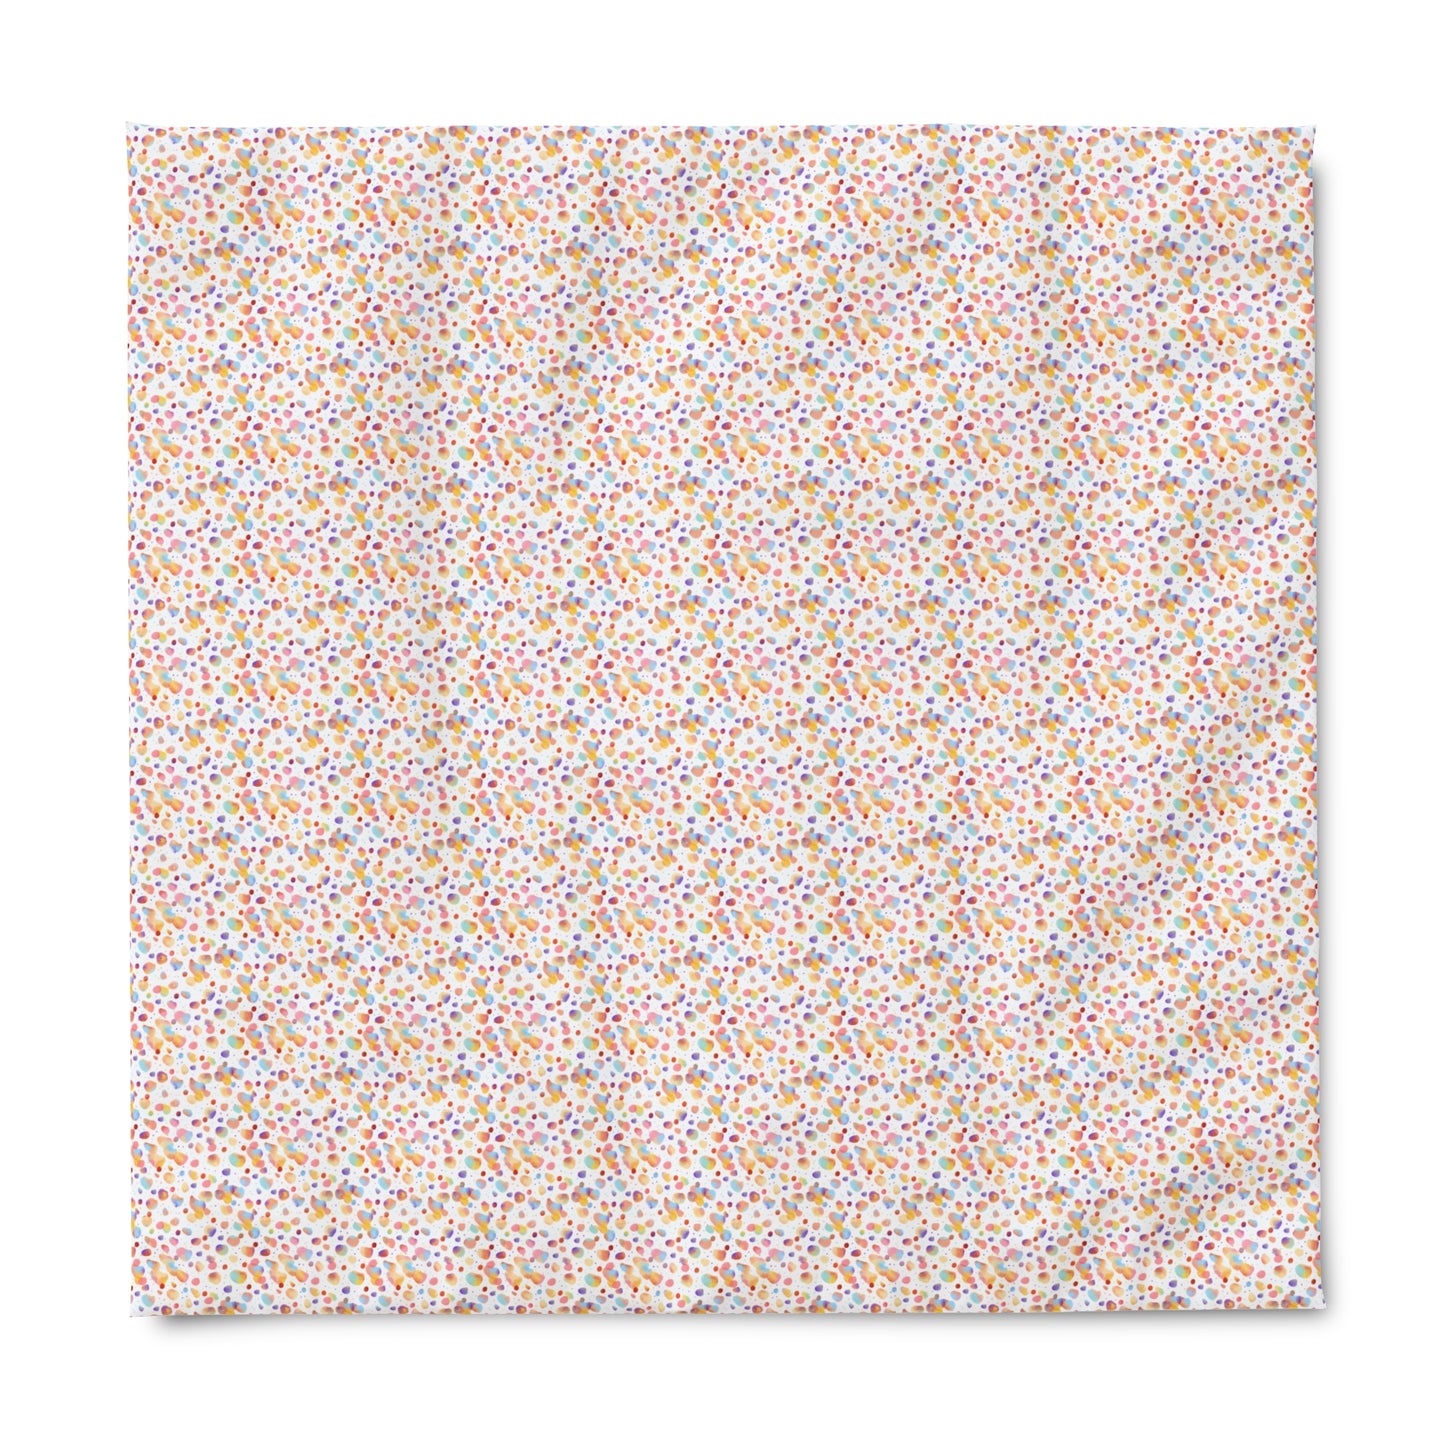 Niccie Pastel Abstract Pattern Duvet Cover Bedding for a Stylish